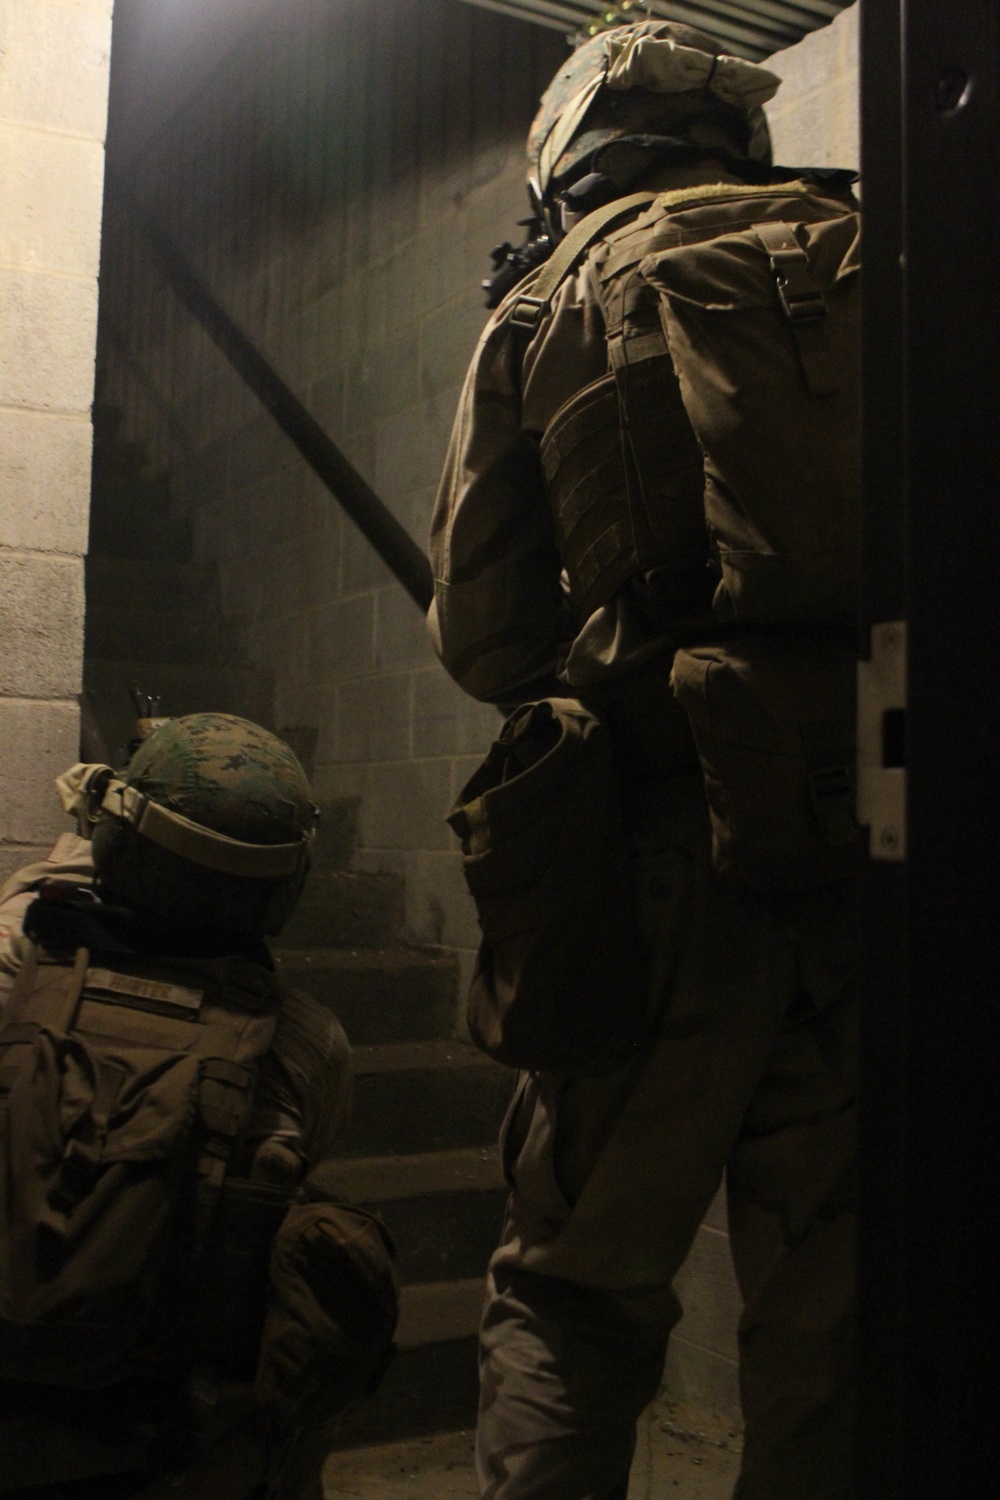 MARSOC, 2nd CEB improve link between MAGTF and Special Operations Forces